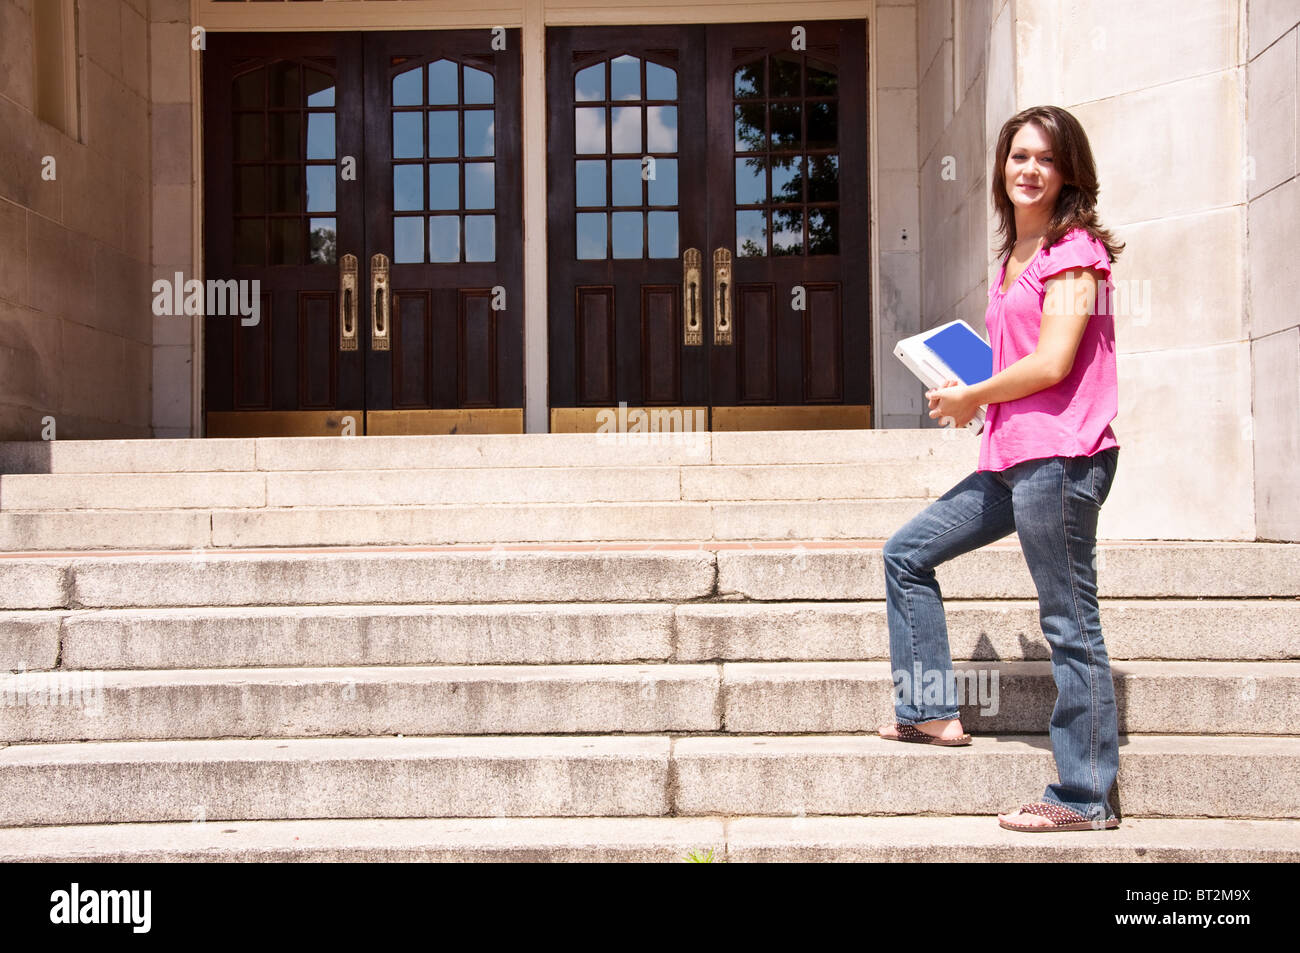 Female college student standing at front door of school with books in hand. Stock Photo